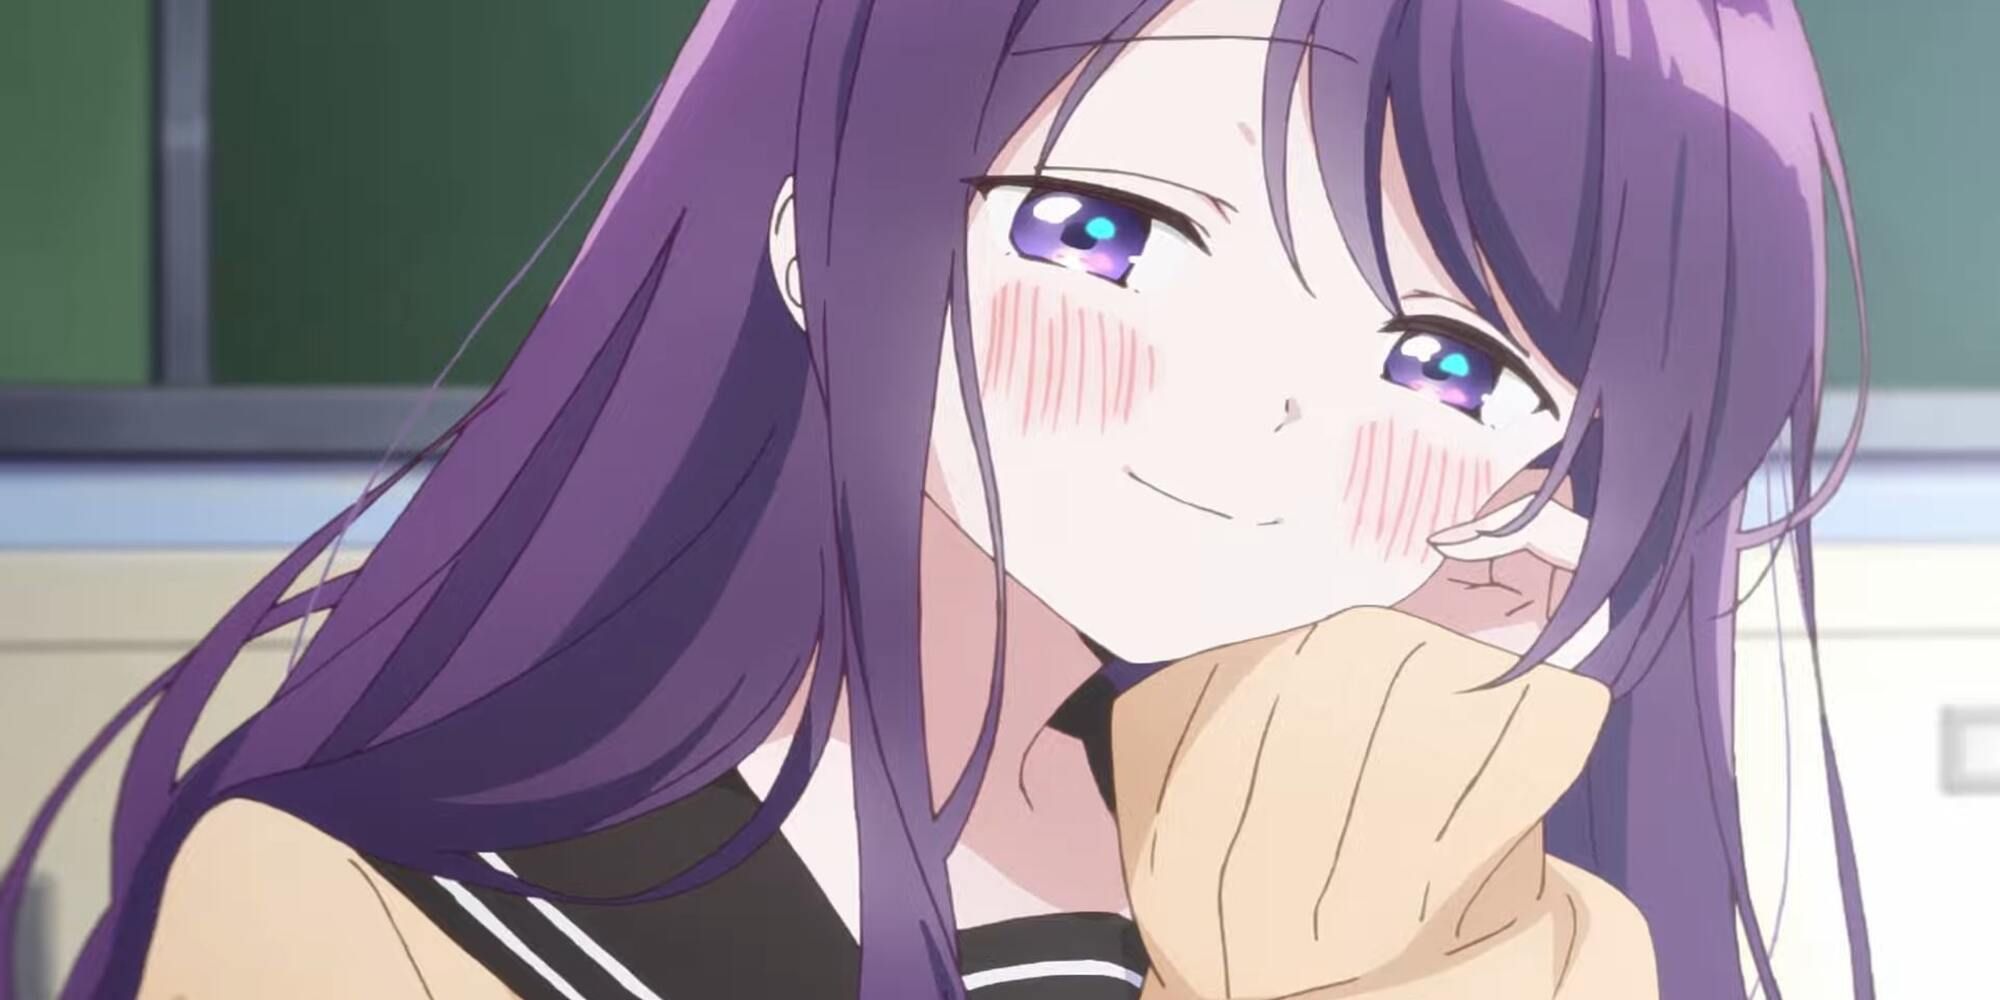 A girl with purple hair smiles and blushes with her chin resting on her hand.